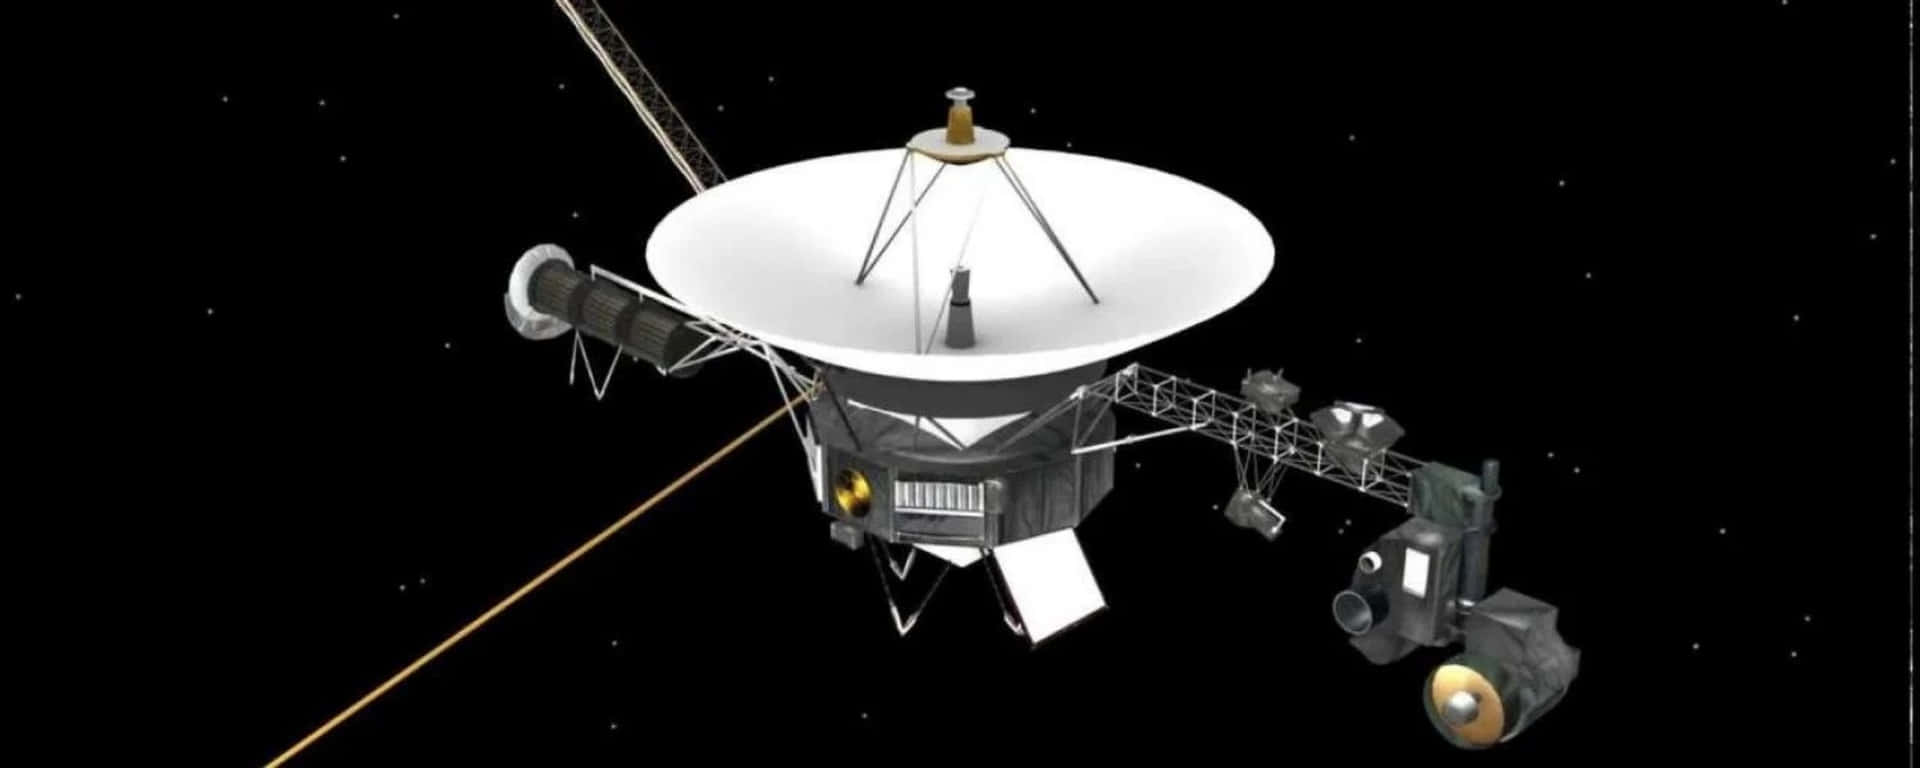 Learn more about the Voyager mission as we explore deep space.